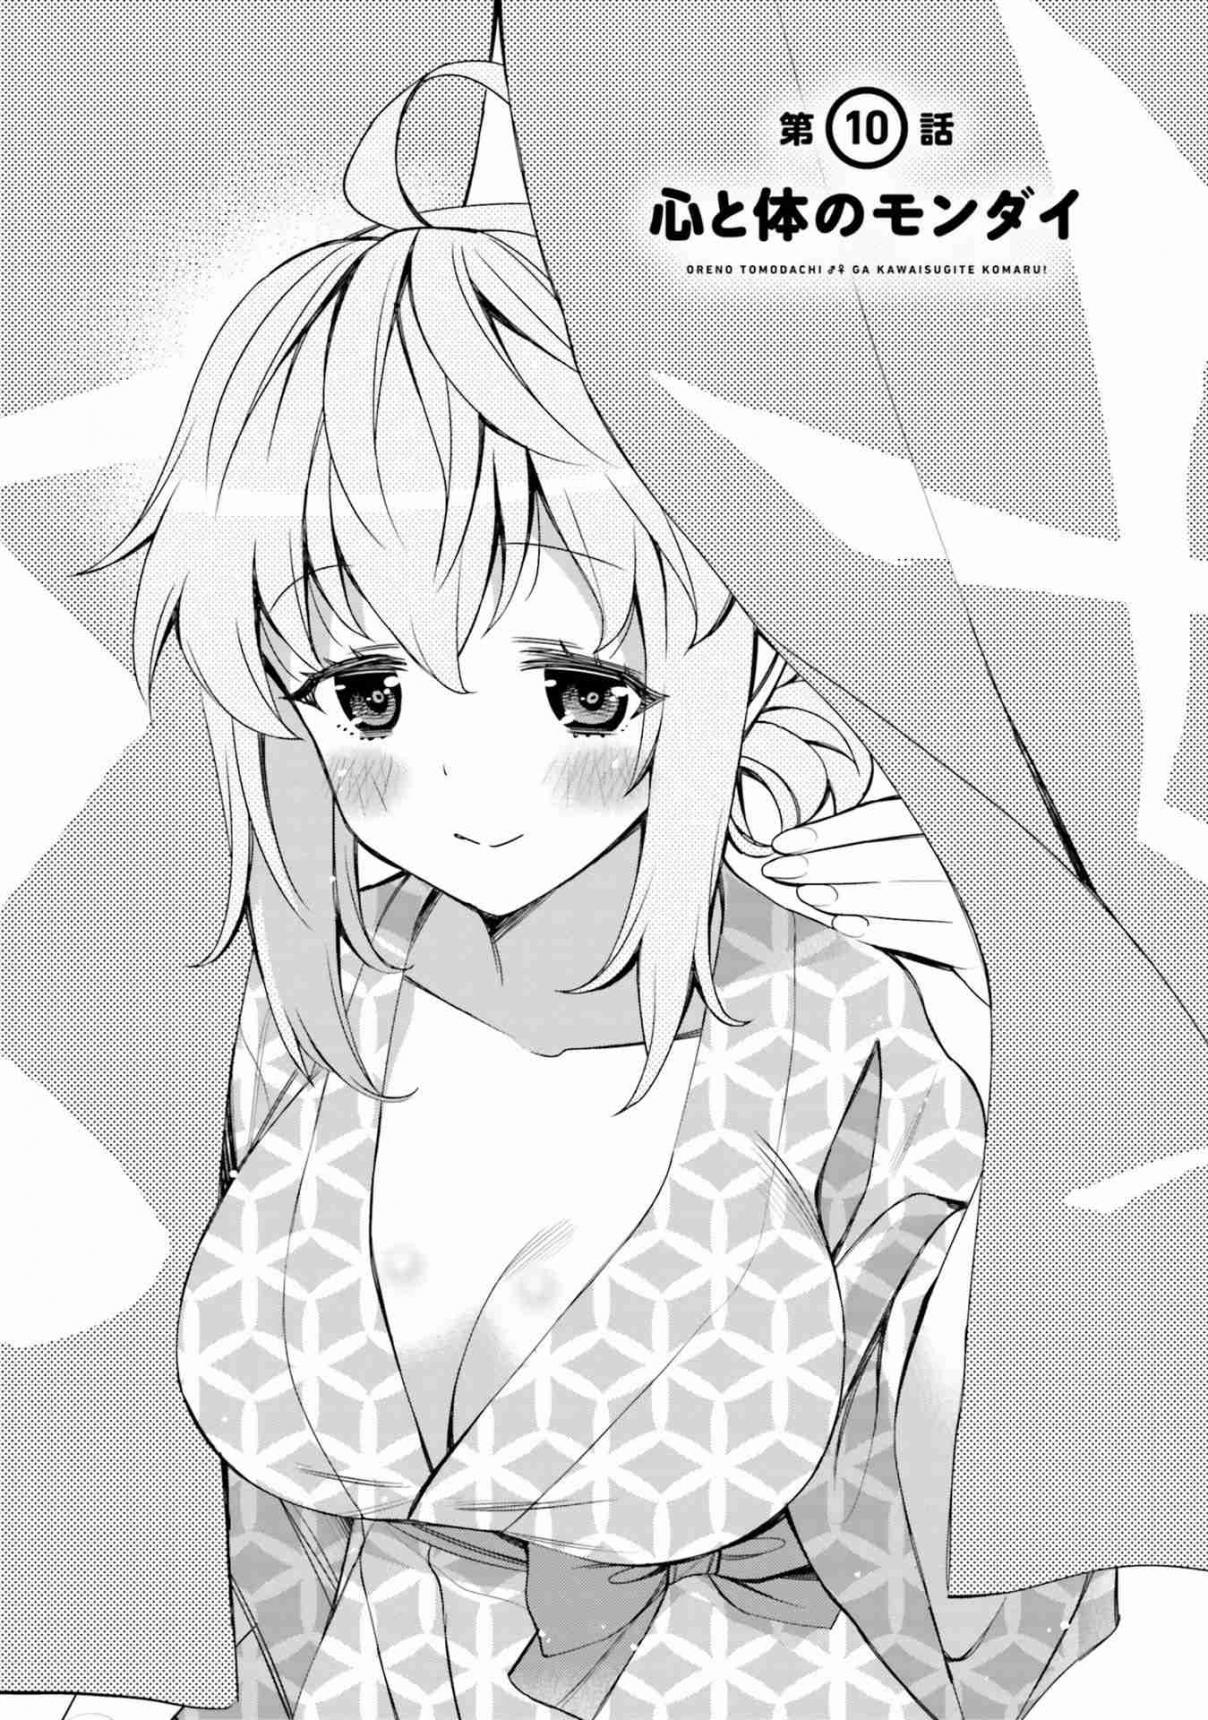 I Am Worried That My Childhood Friend Is Too Cute! Vol. 2 Ch. 10